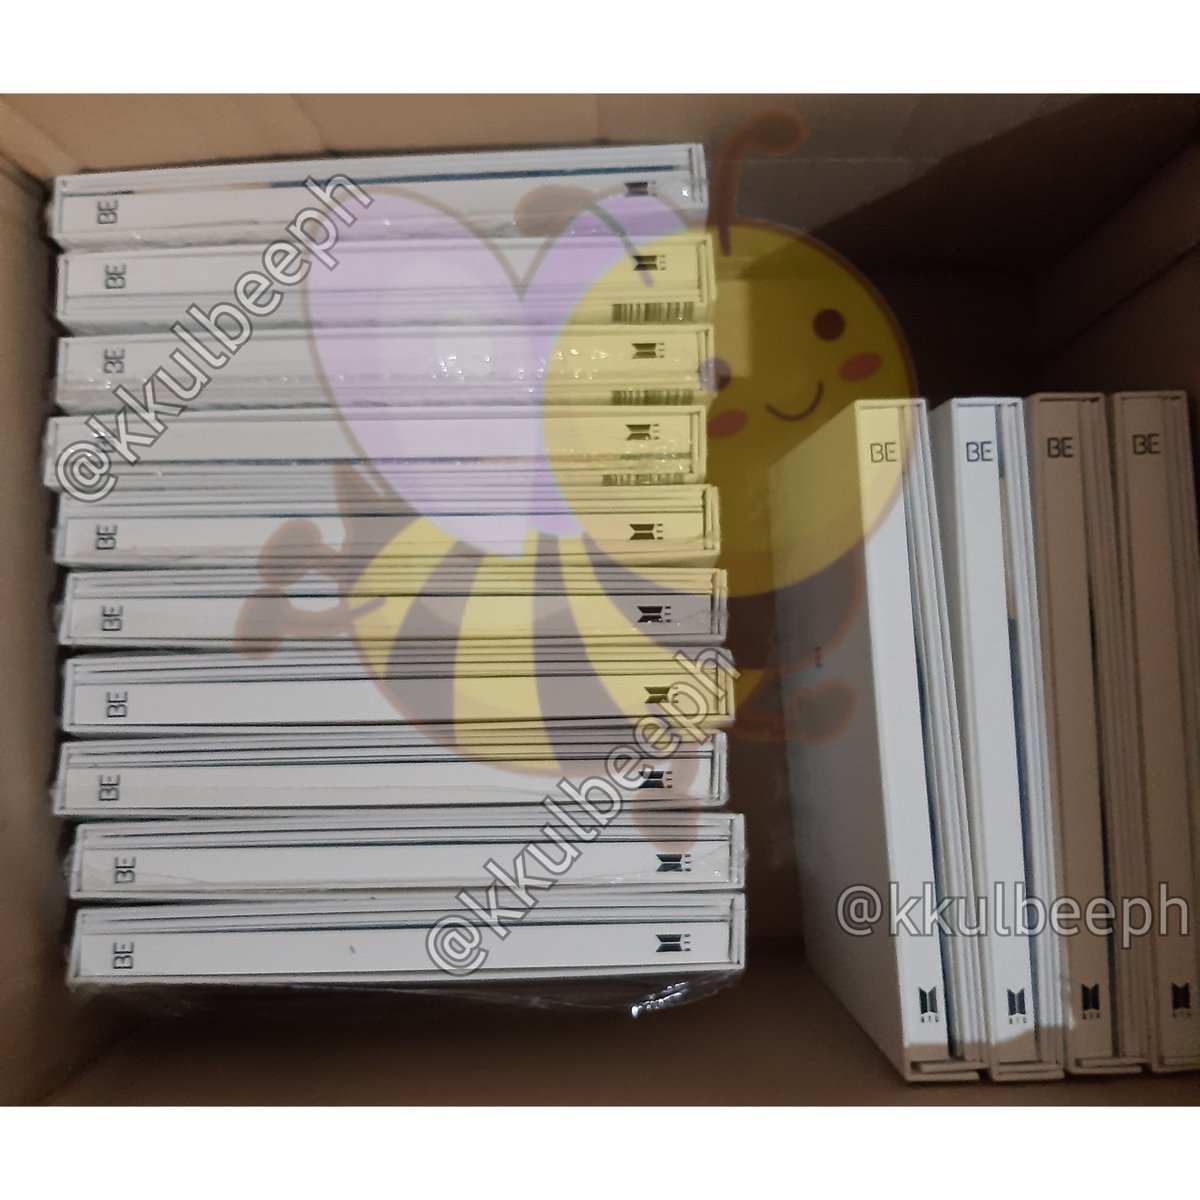  #KkulBeeliNaPLS HELP US RT ON-HAND & READY TO SHIP! Please manage your expectations  •DOO - until OOS•DOP - 7 days after order is place (dm for request to extend)• Prices & availability: pls check on the form •Form :  https://www.cognitoforms.com/KkulBeePH/ONHANDITEMS++